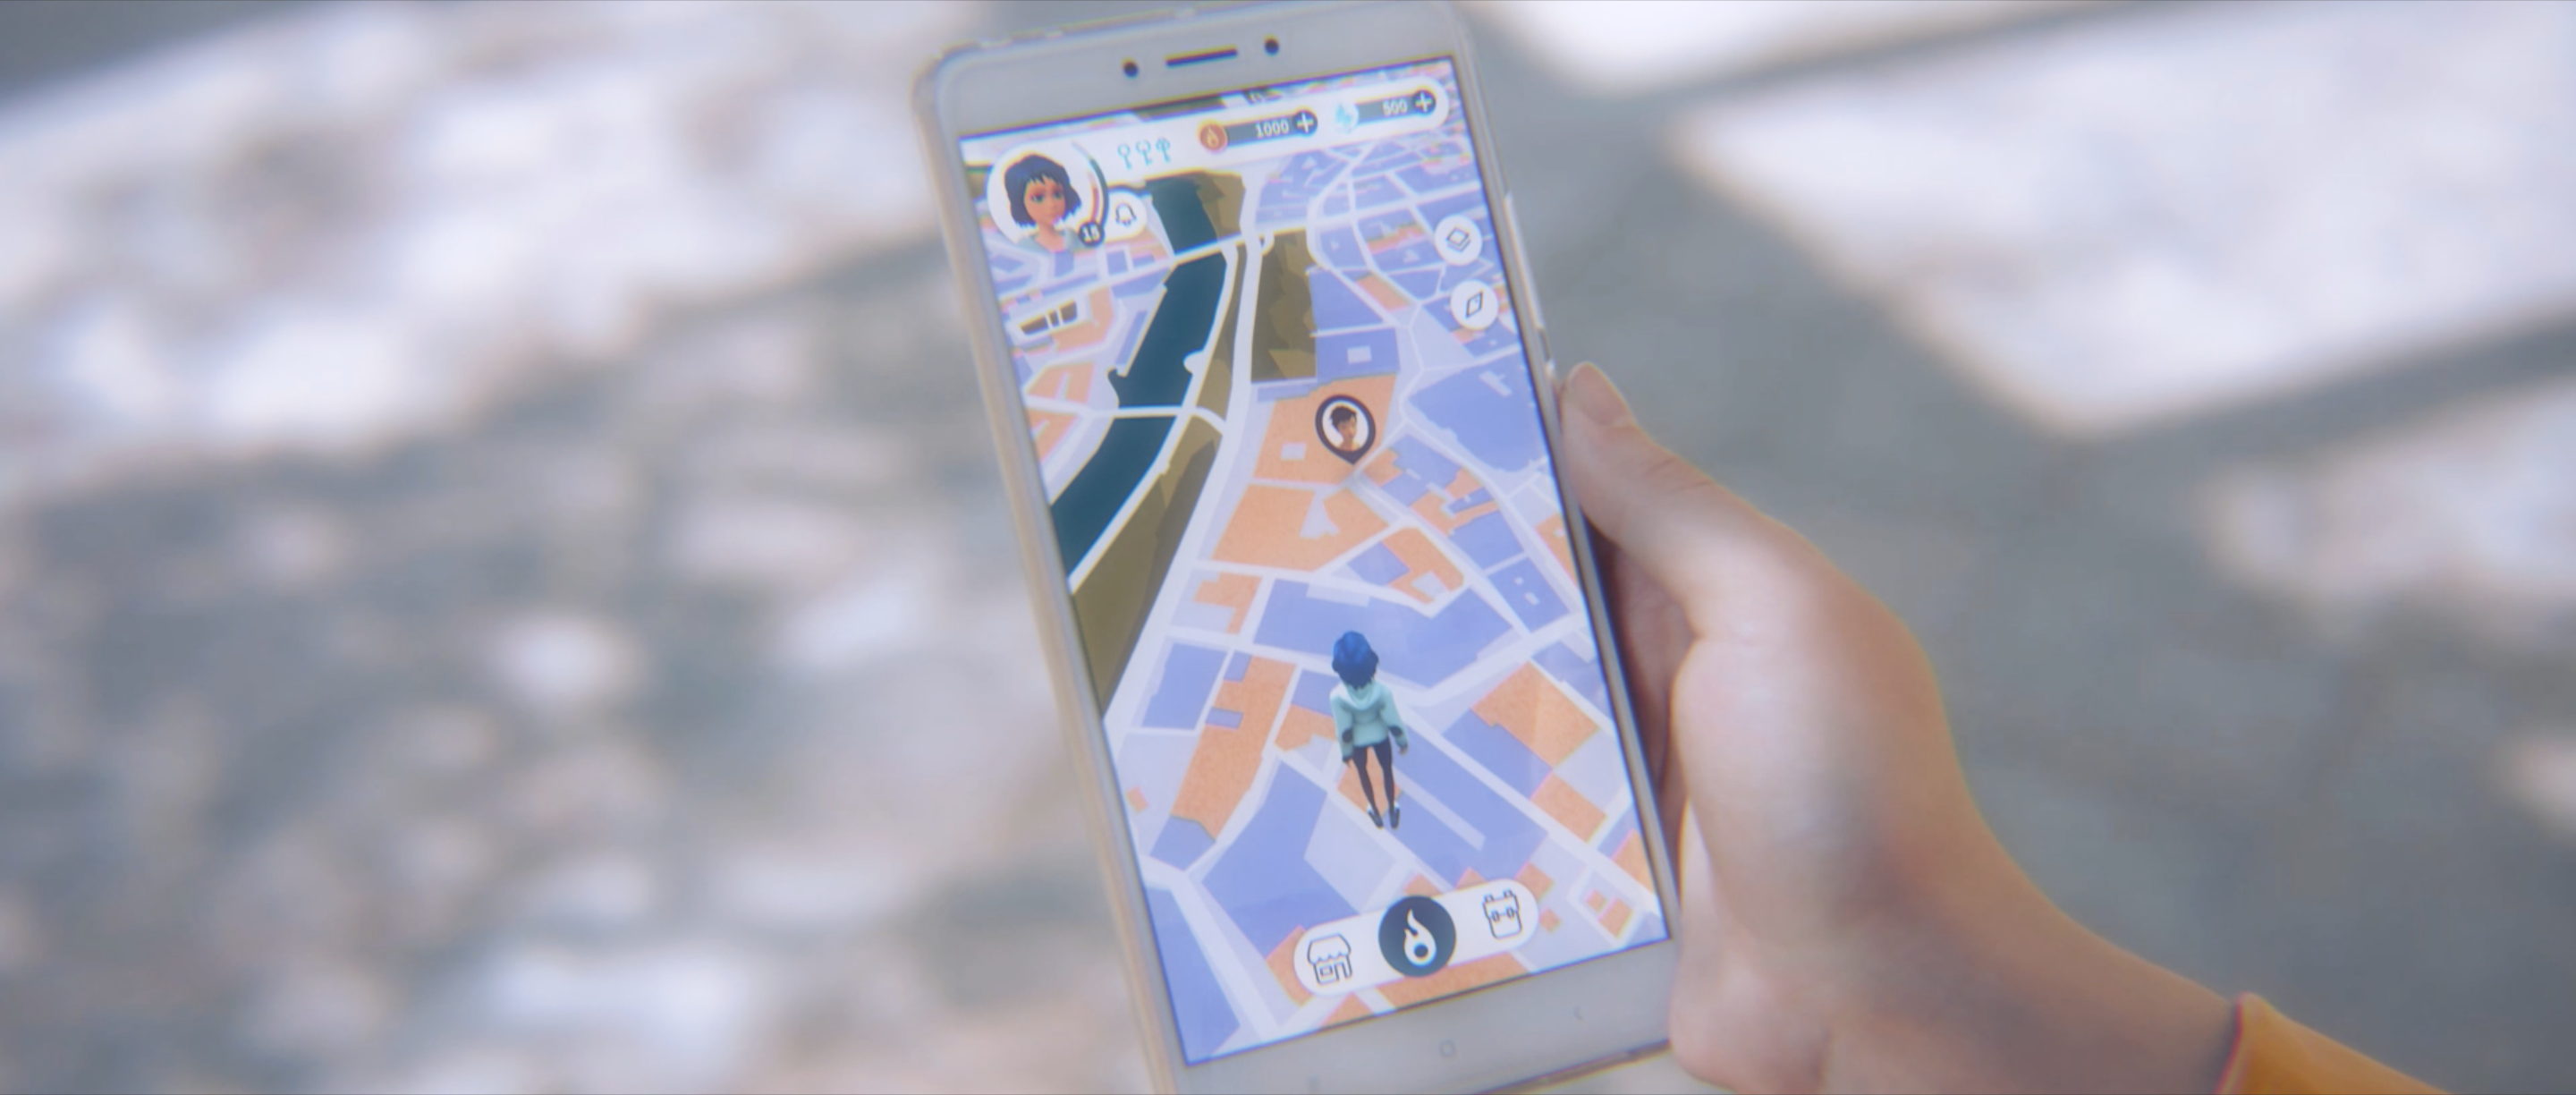 ‘Kluest’ Brings Creators, Players Together in an AR Environment